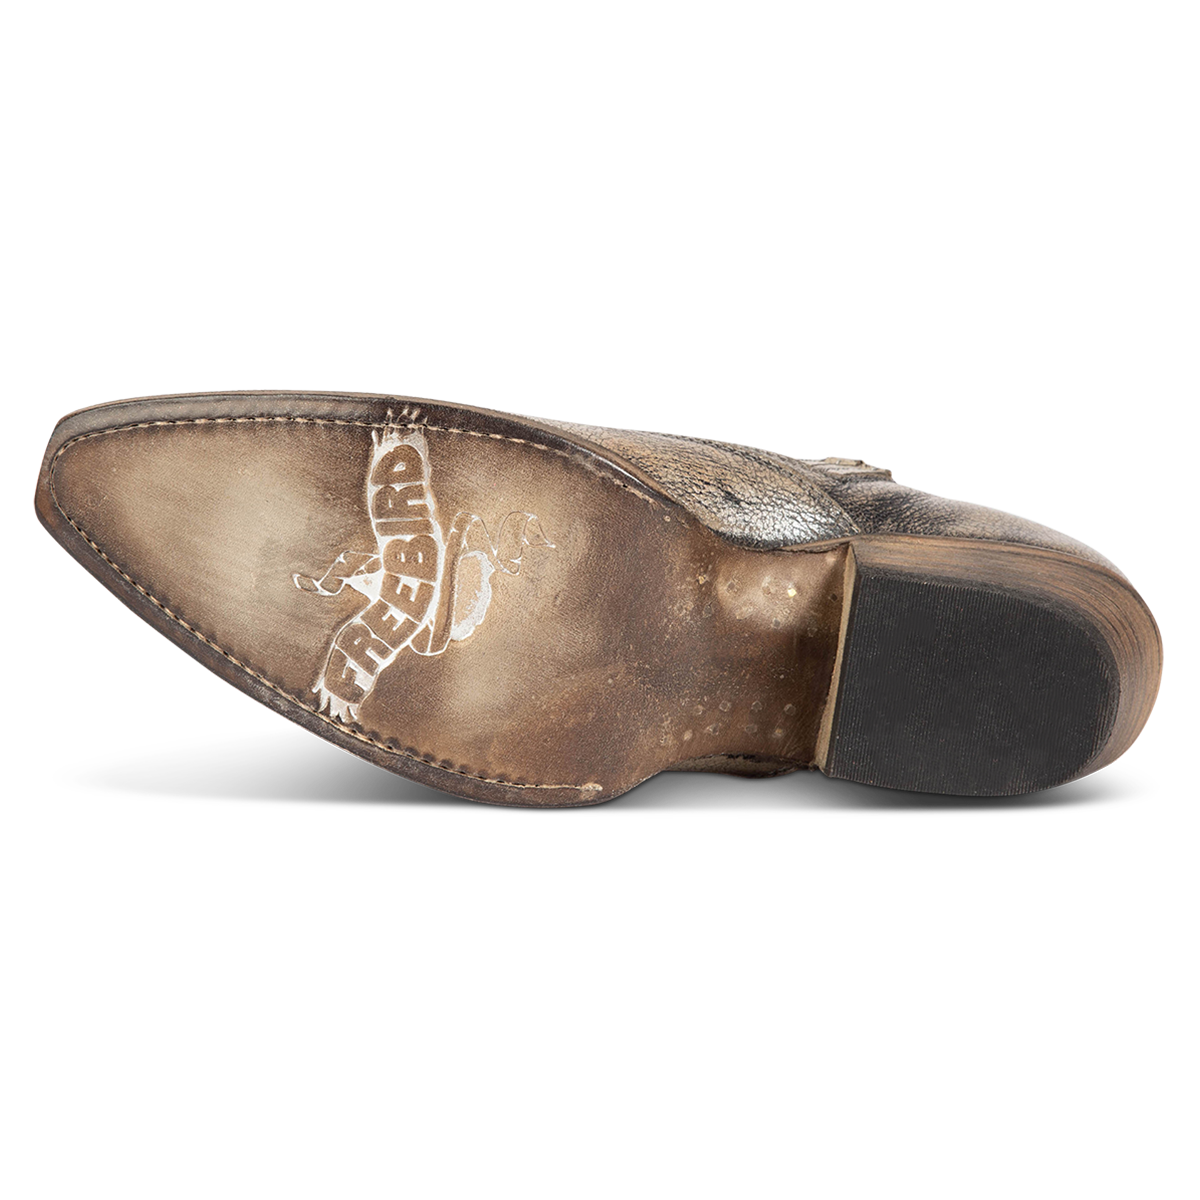 Leather sole imprinted with FREEBIRD on women's Wyoming beige western shoe